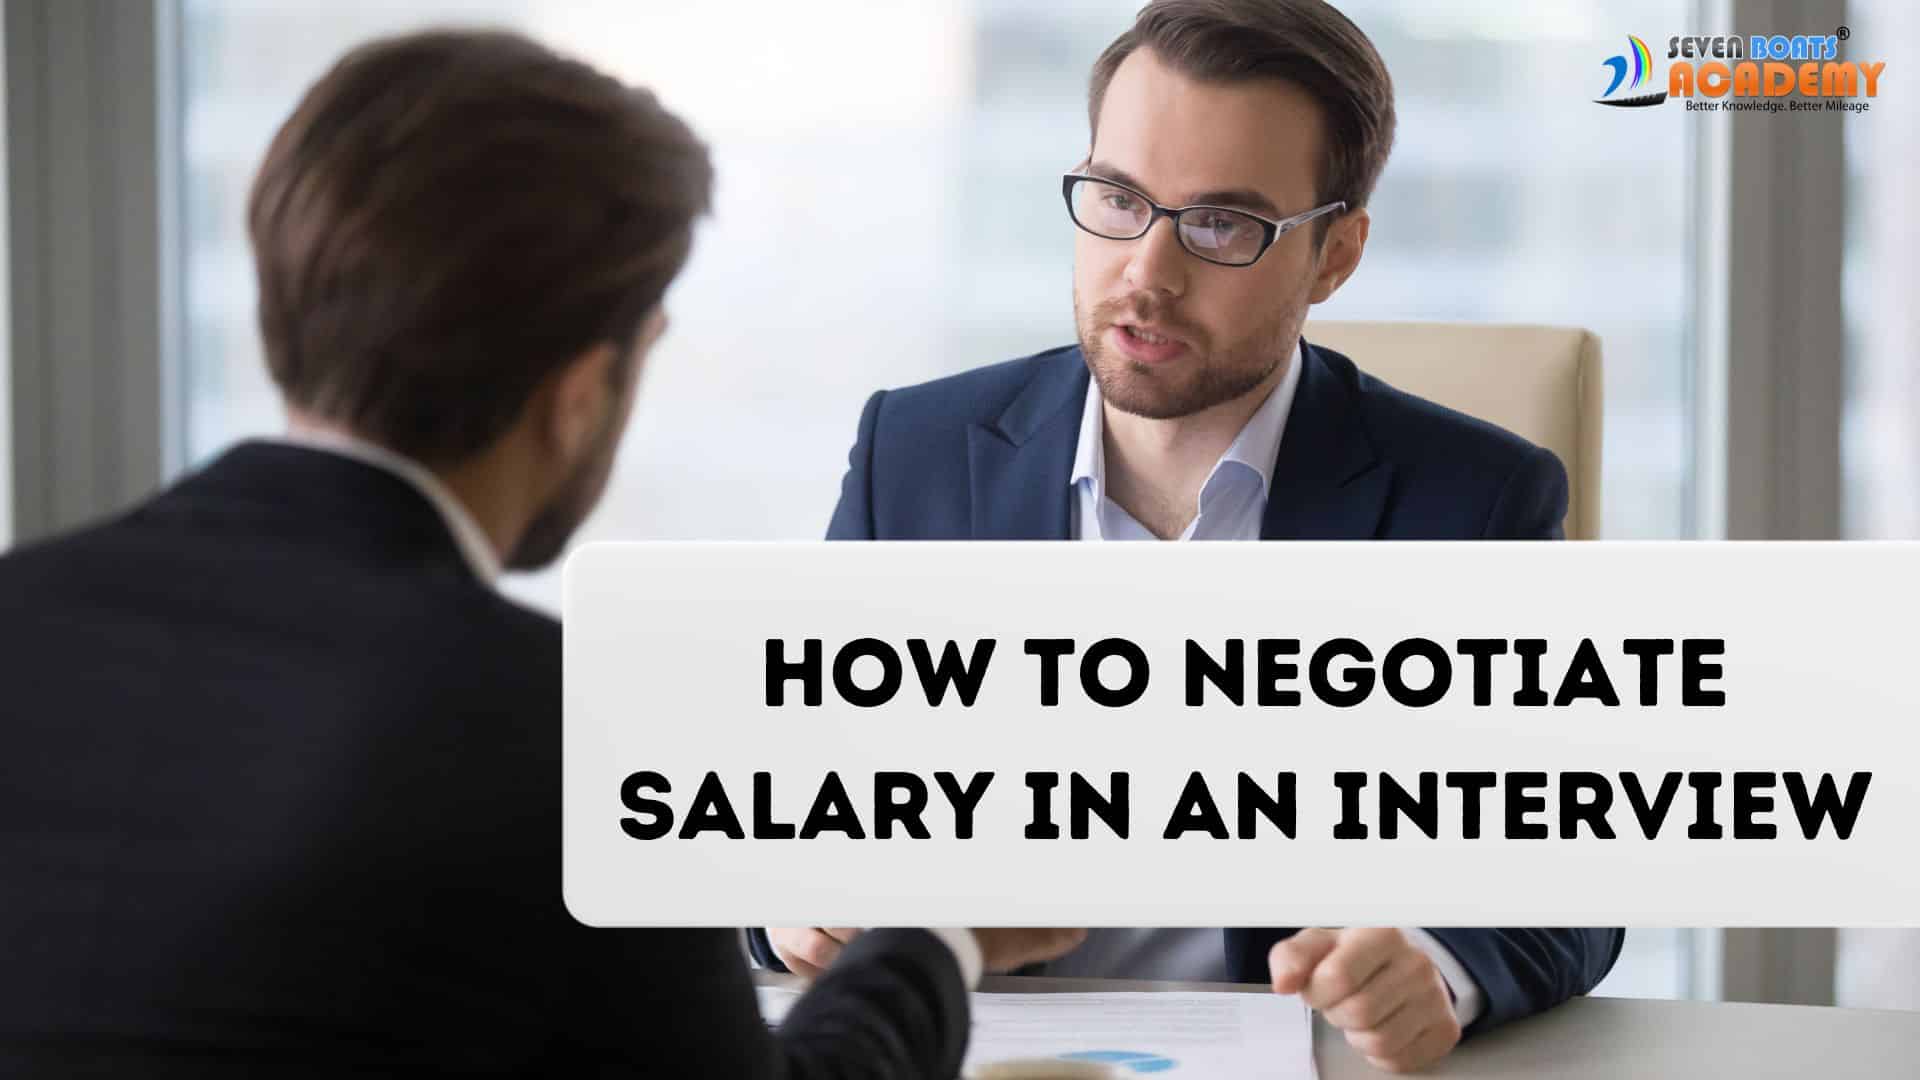 How to Negotiate Salary in an Interview